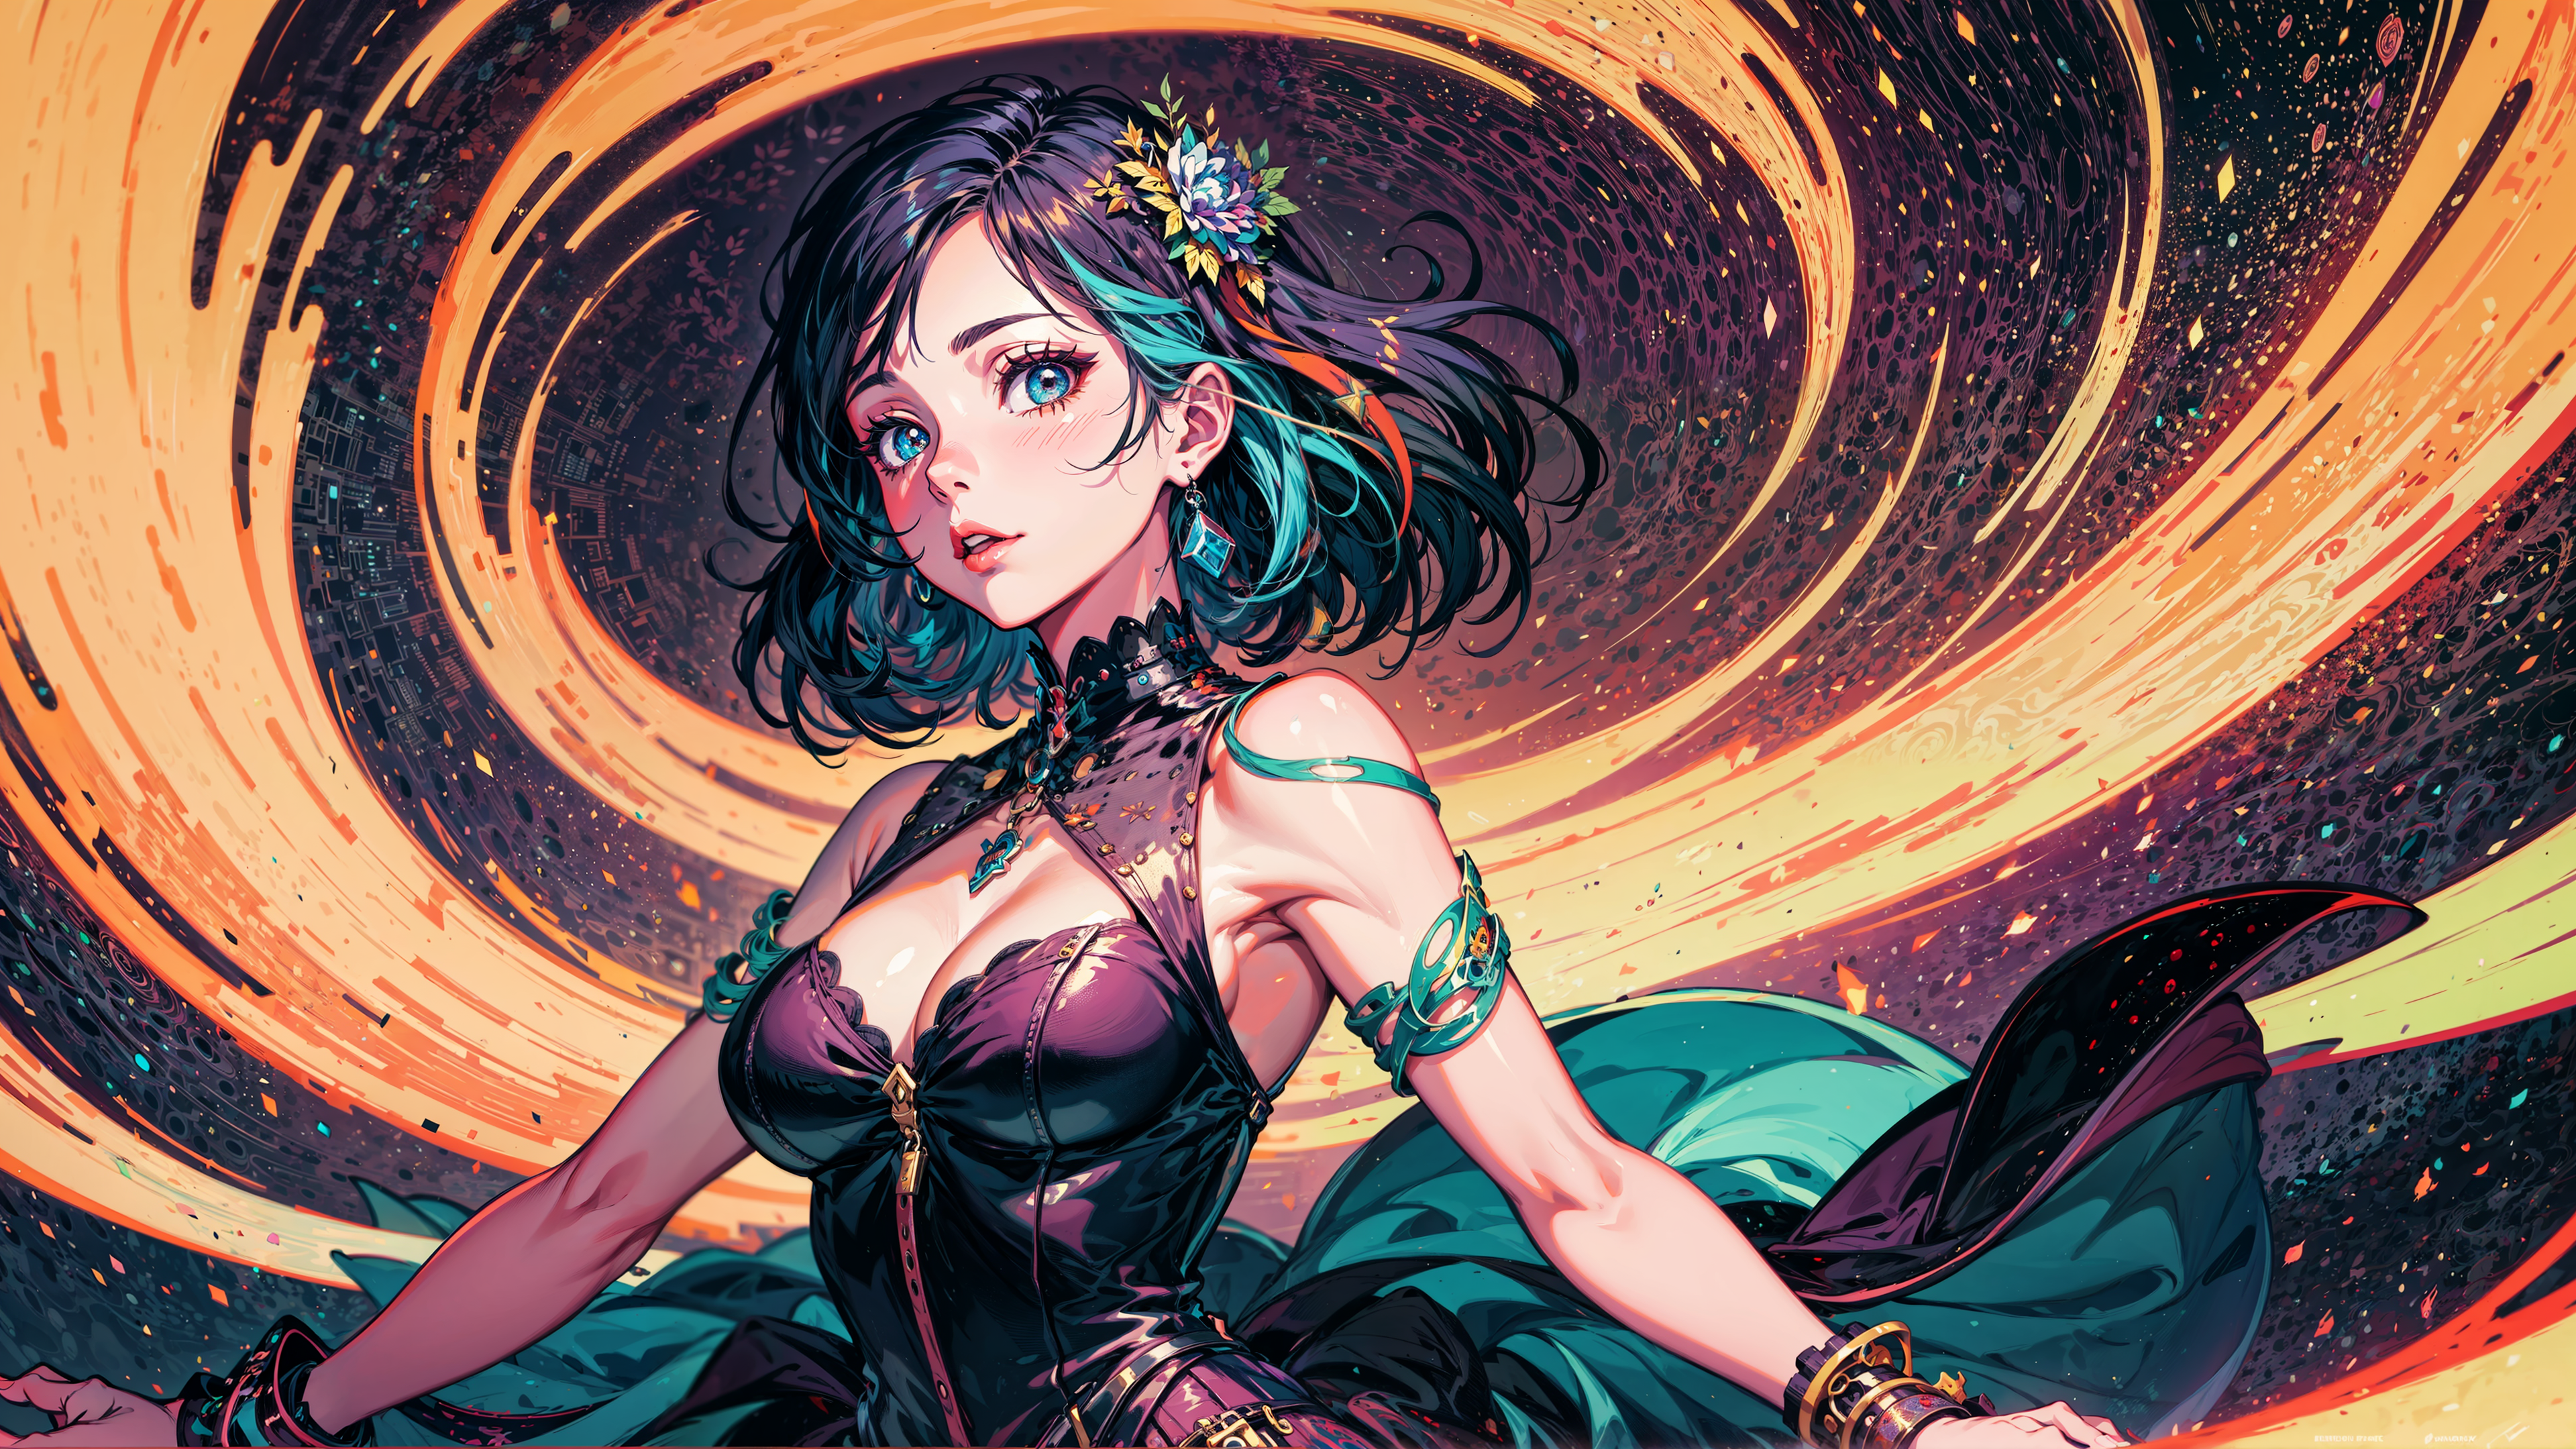 Anime 3840x2160 AI art anime girls dyed hair multi-colored hair flower in hair short hair blue eyes bare shoulders cleavage dress looking at viewer colorful time travel universe space science fiction fantasy art magic 4K Stable Diffusion photopea DeviantArt digital art